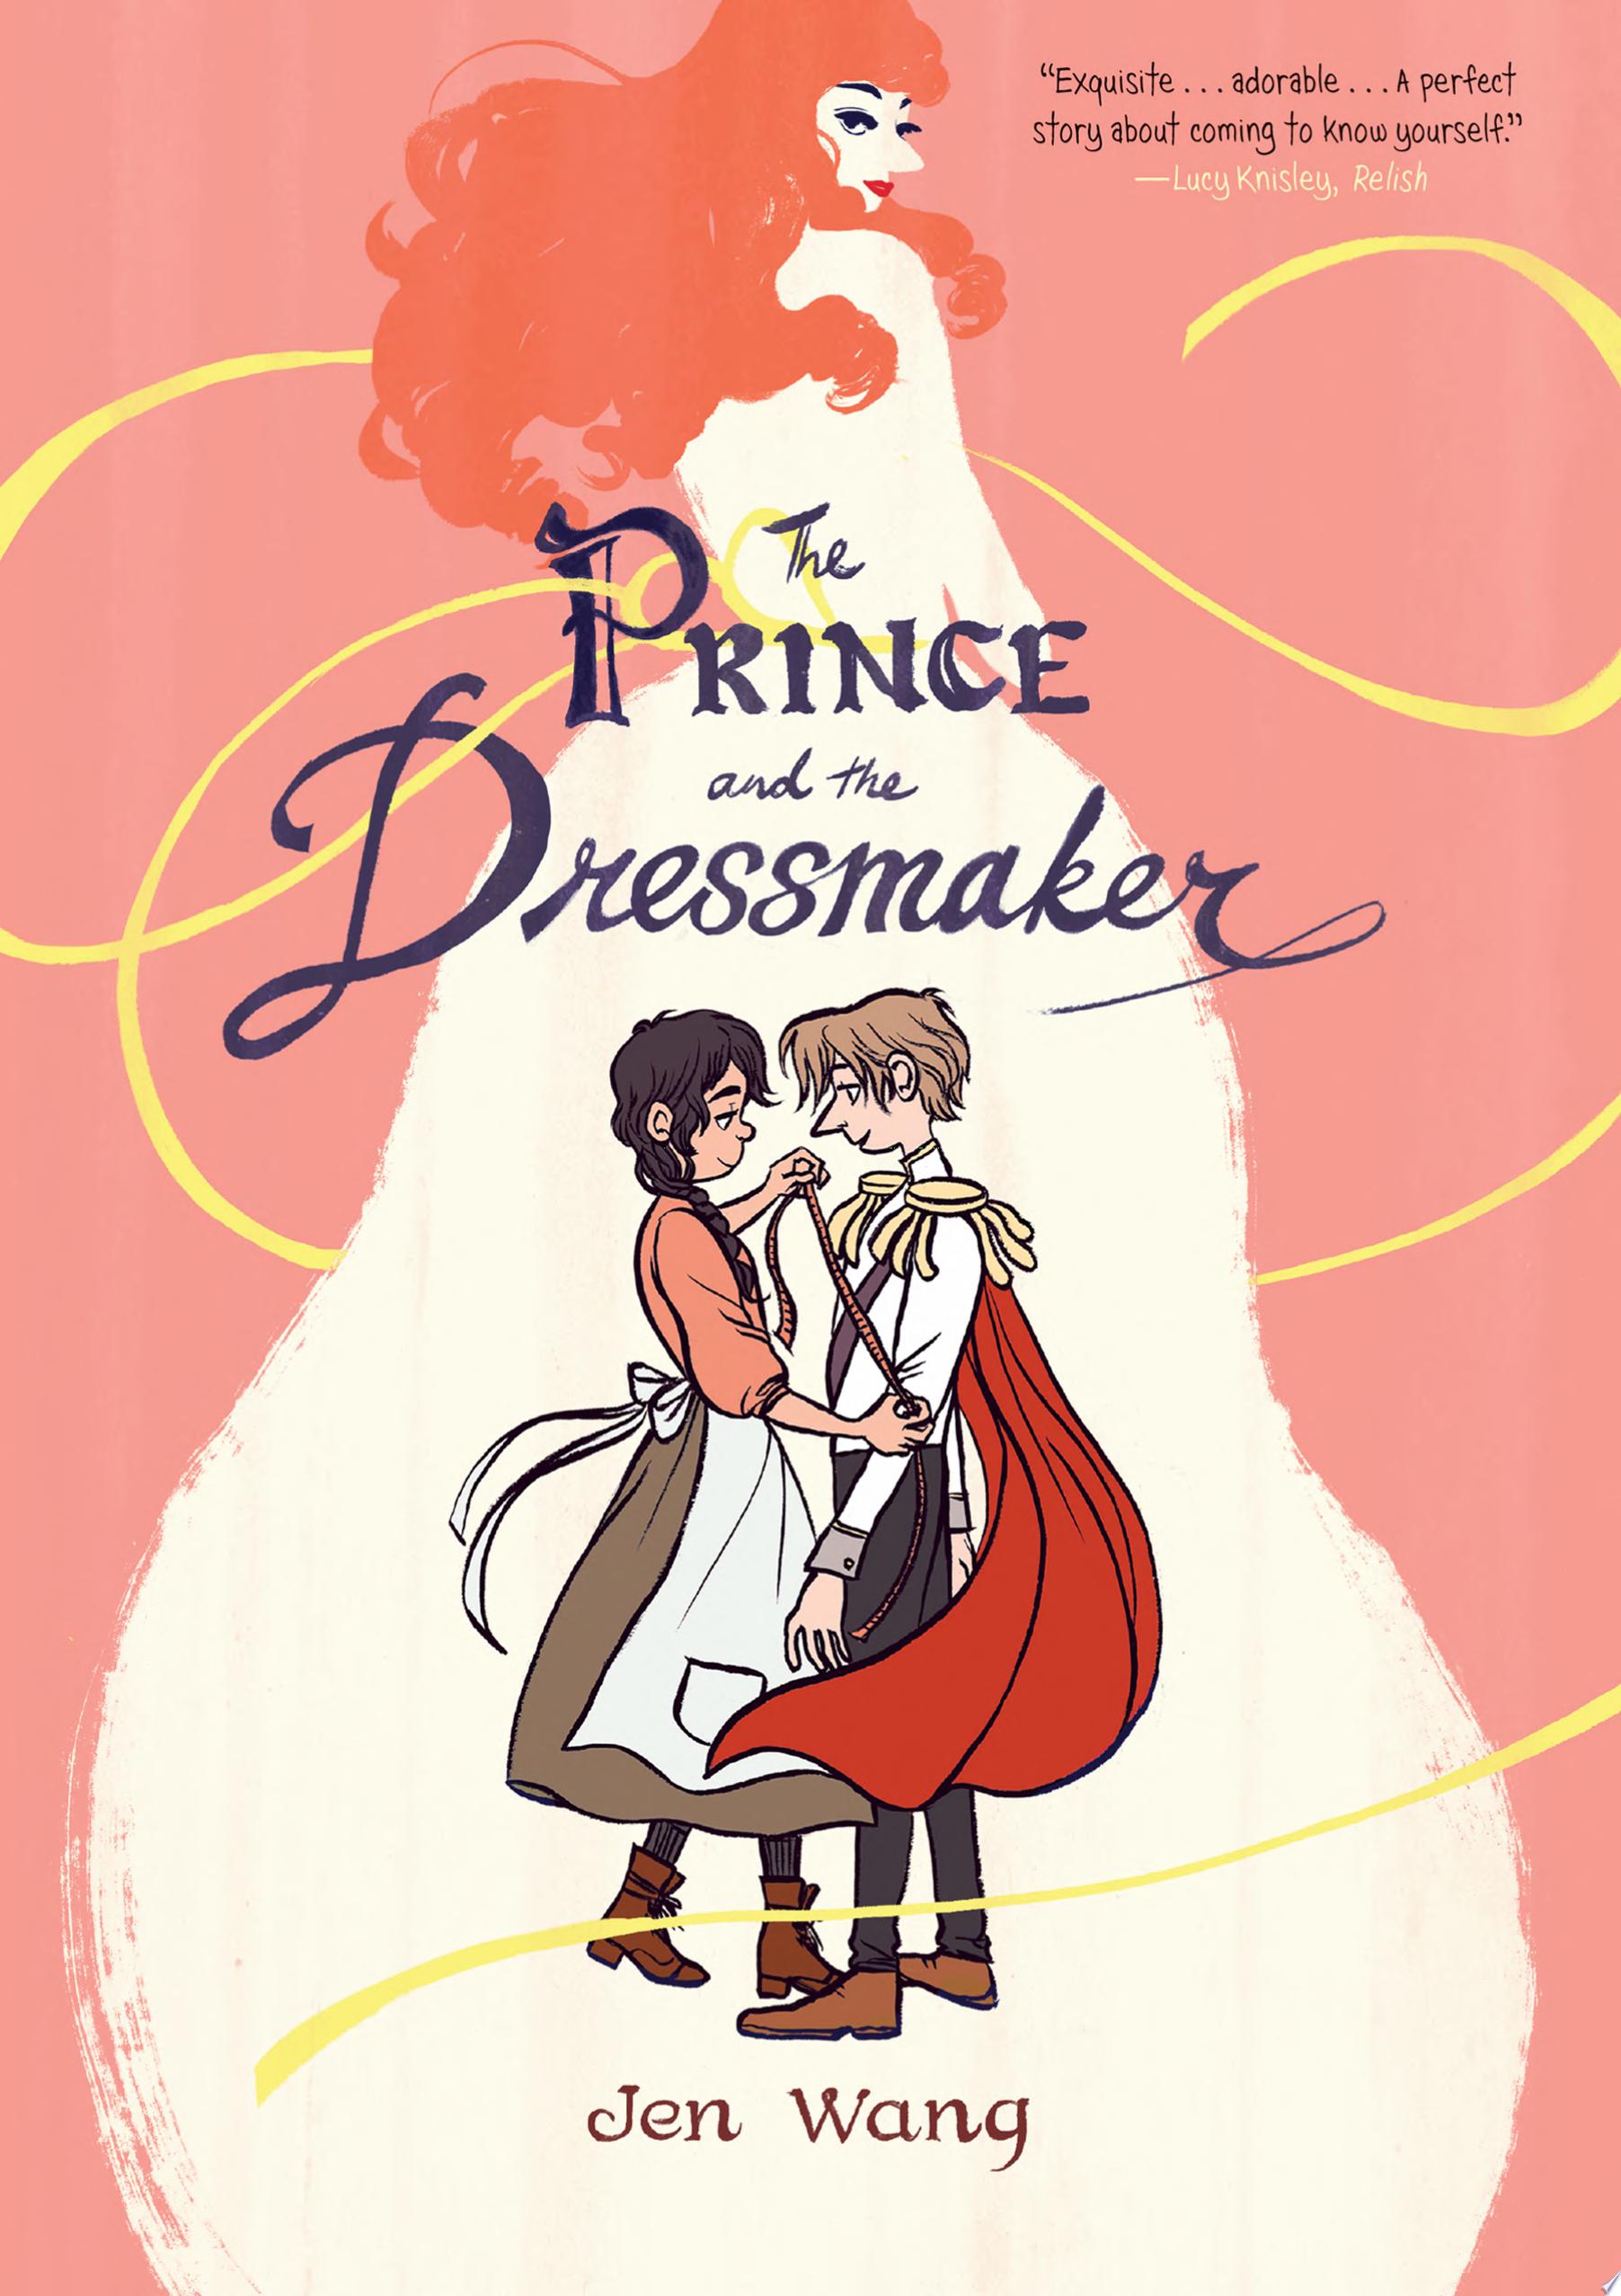 Image for "The Prince and the Dressmaker"